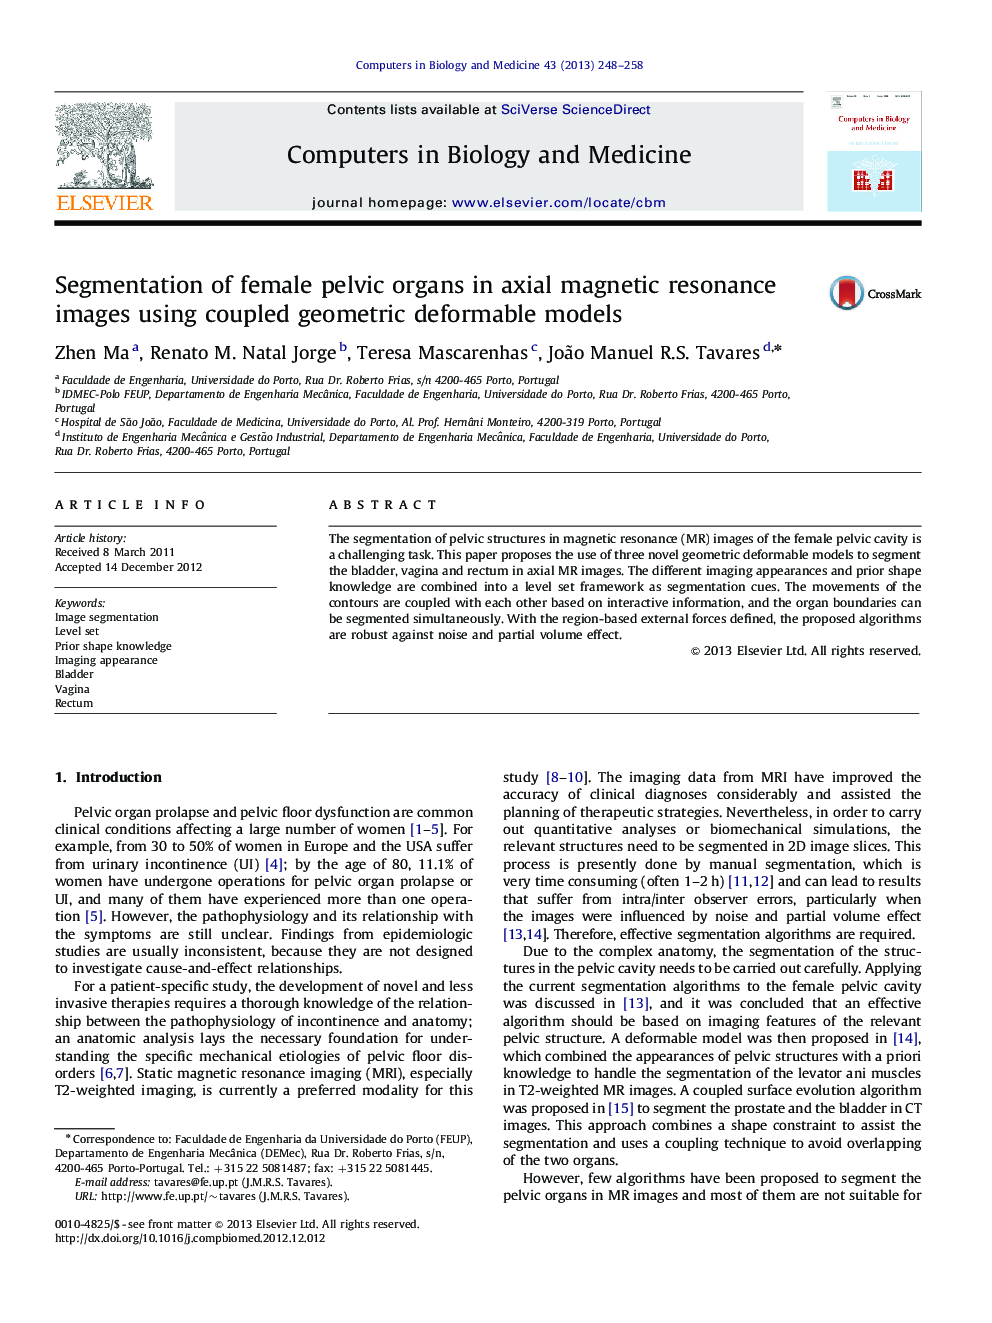 Segmentation of female pelvic organs in axial magnetic resonance images using coupled geometric deformable models